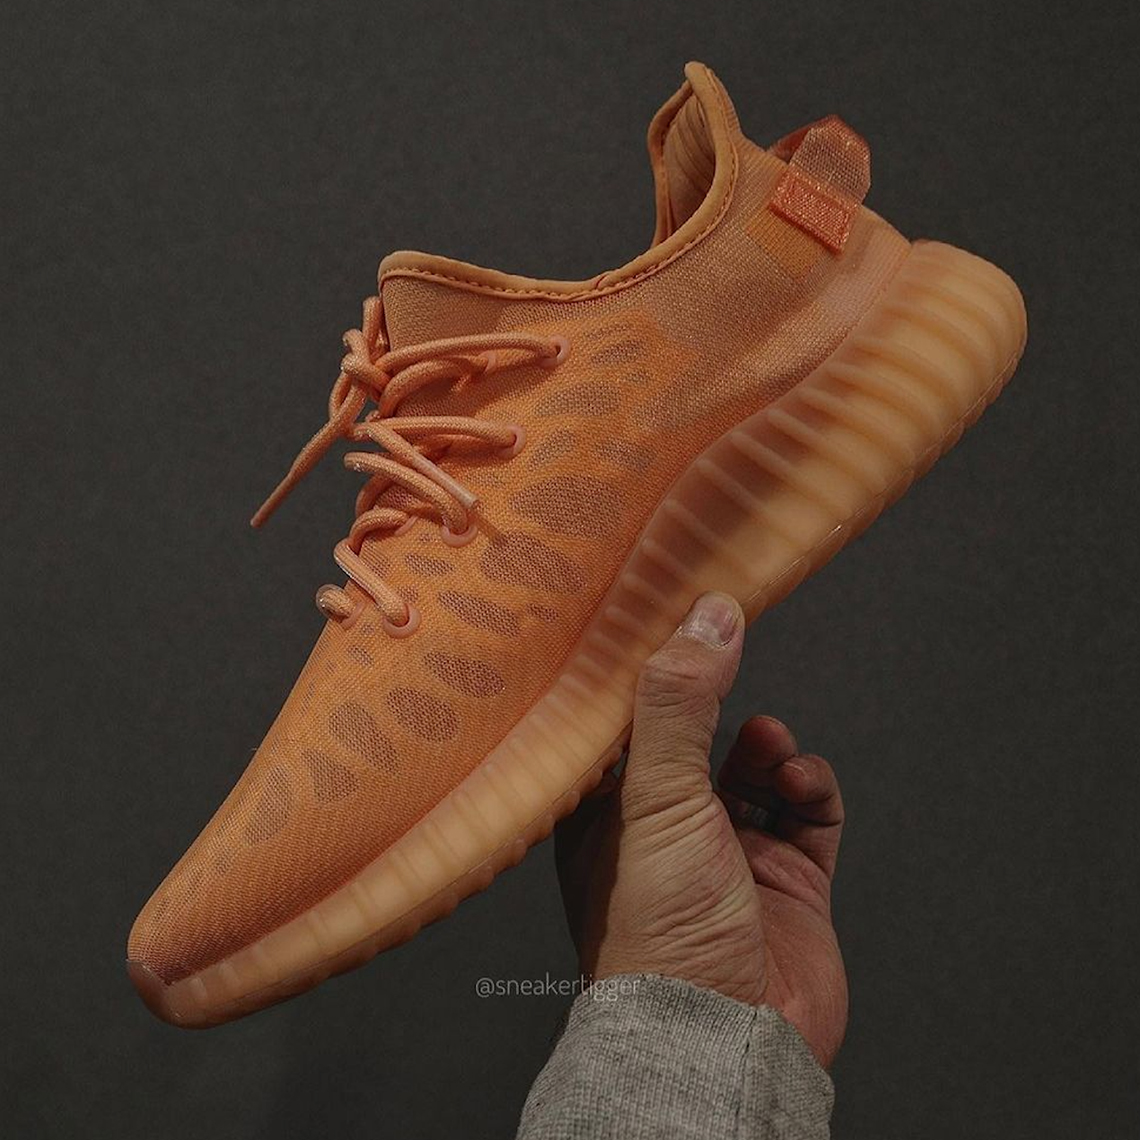 adidas Yeezy Boost 350 v2 Mono Clay Release Date | SneakerNews.com